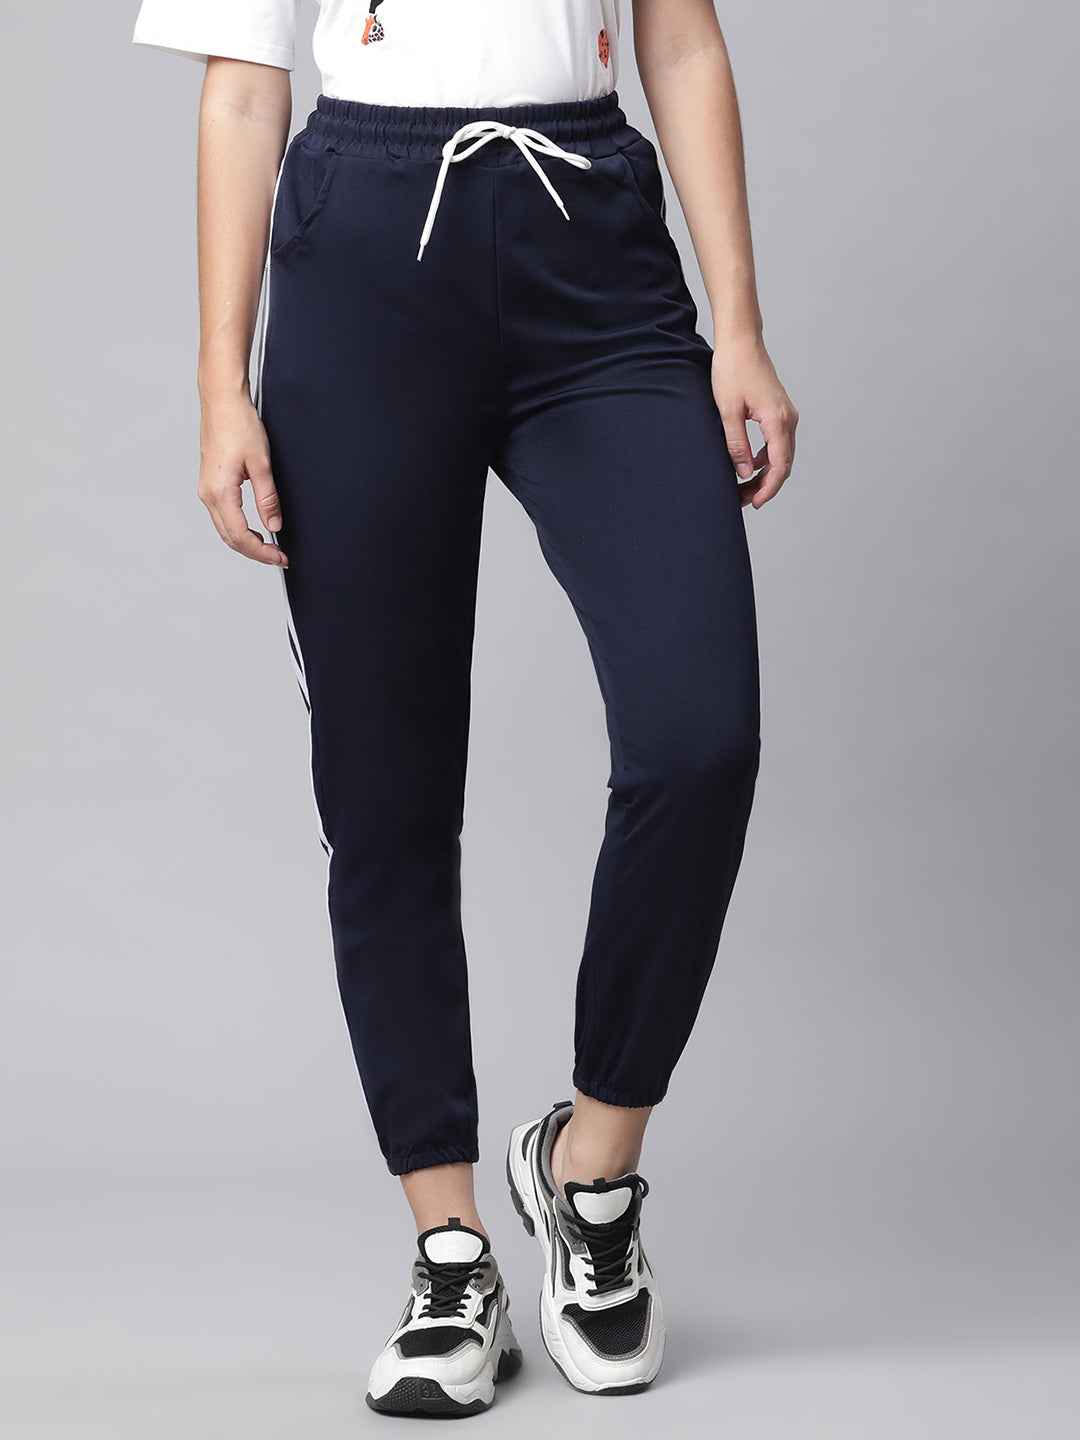 Women Navy Blue Ankle Length Sports Lower With Pockets